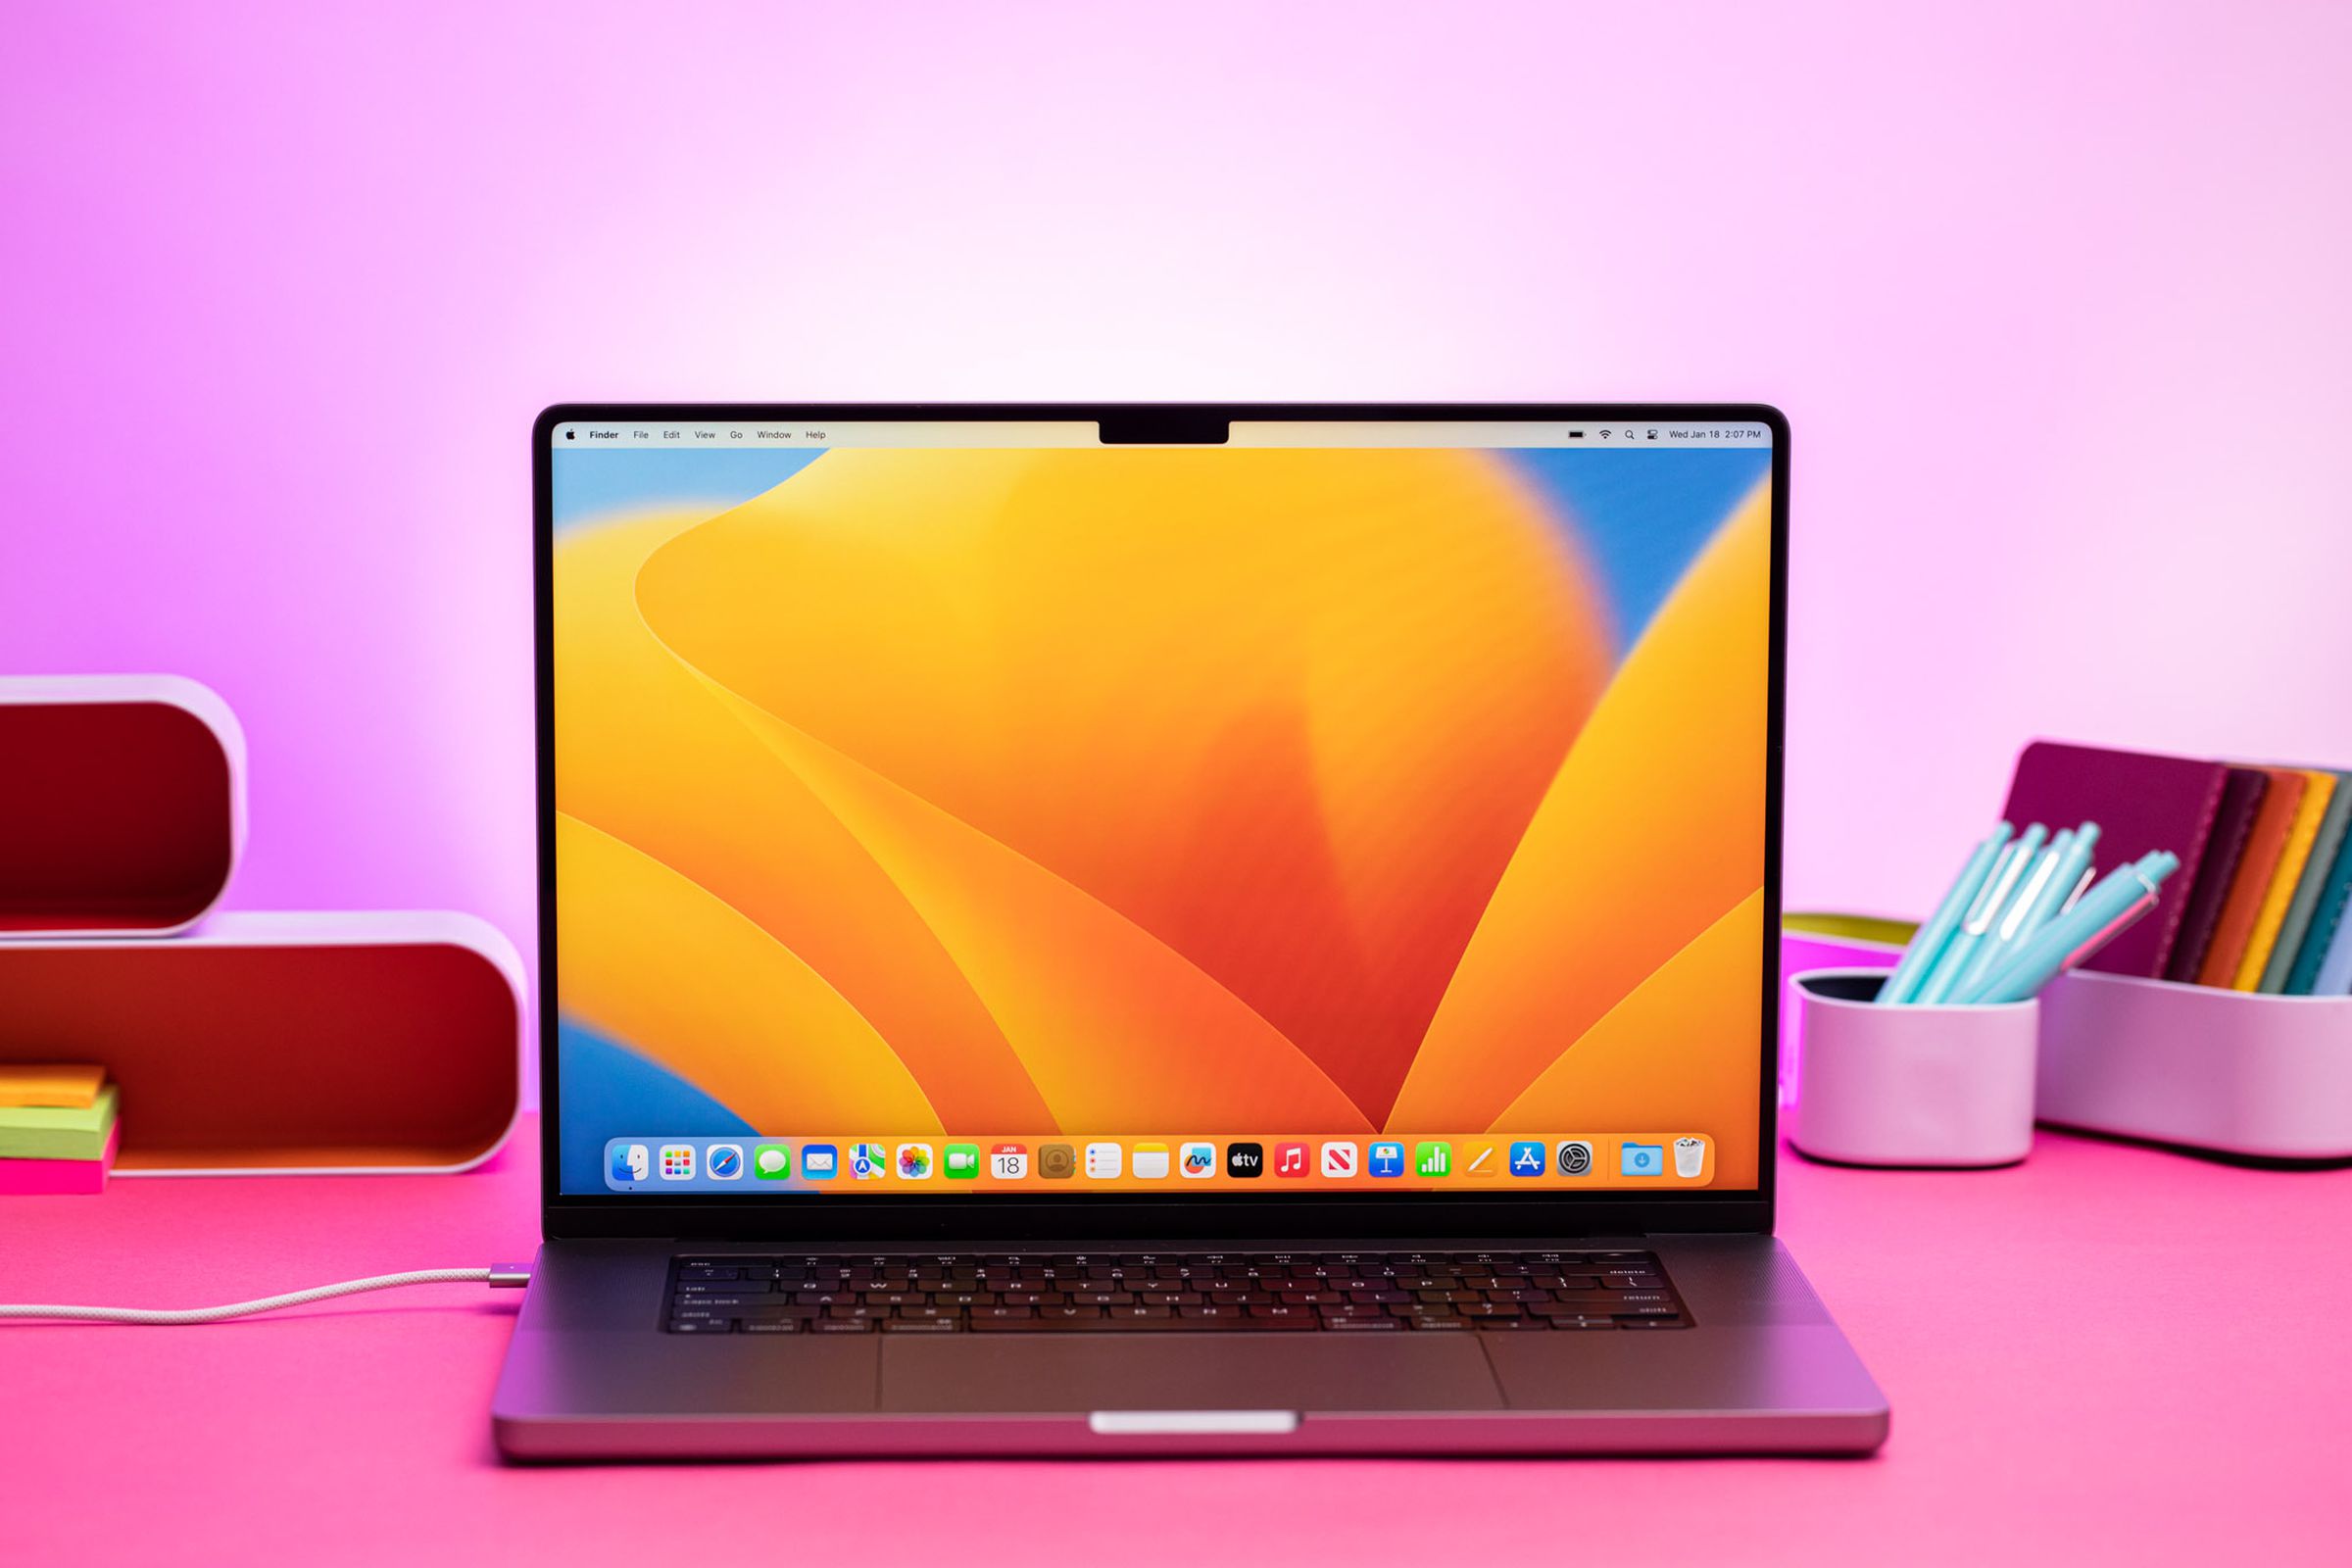 The MacBook Pro 16 (2023) on a pink table. The screen displays a blue and yellow desktop pattern.